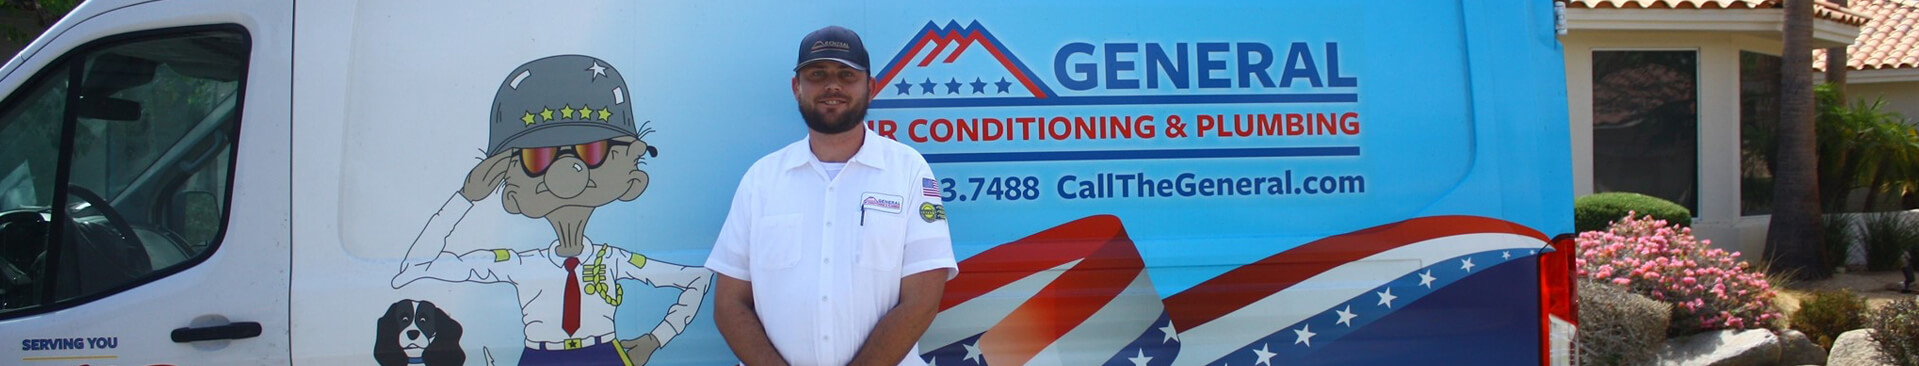 HVAC services air conditioning and heating General Air Conditioning & Plumbing